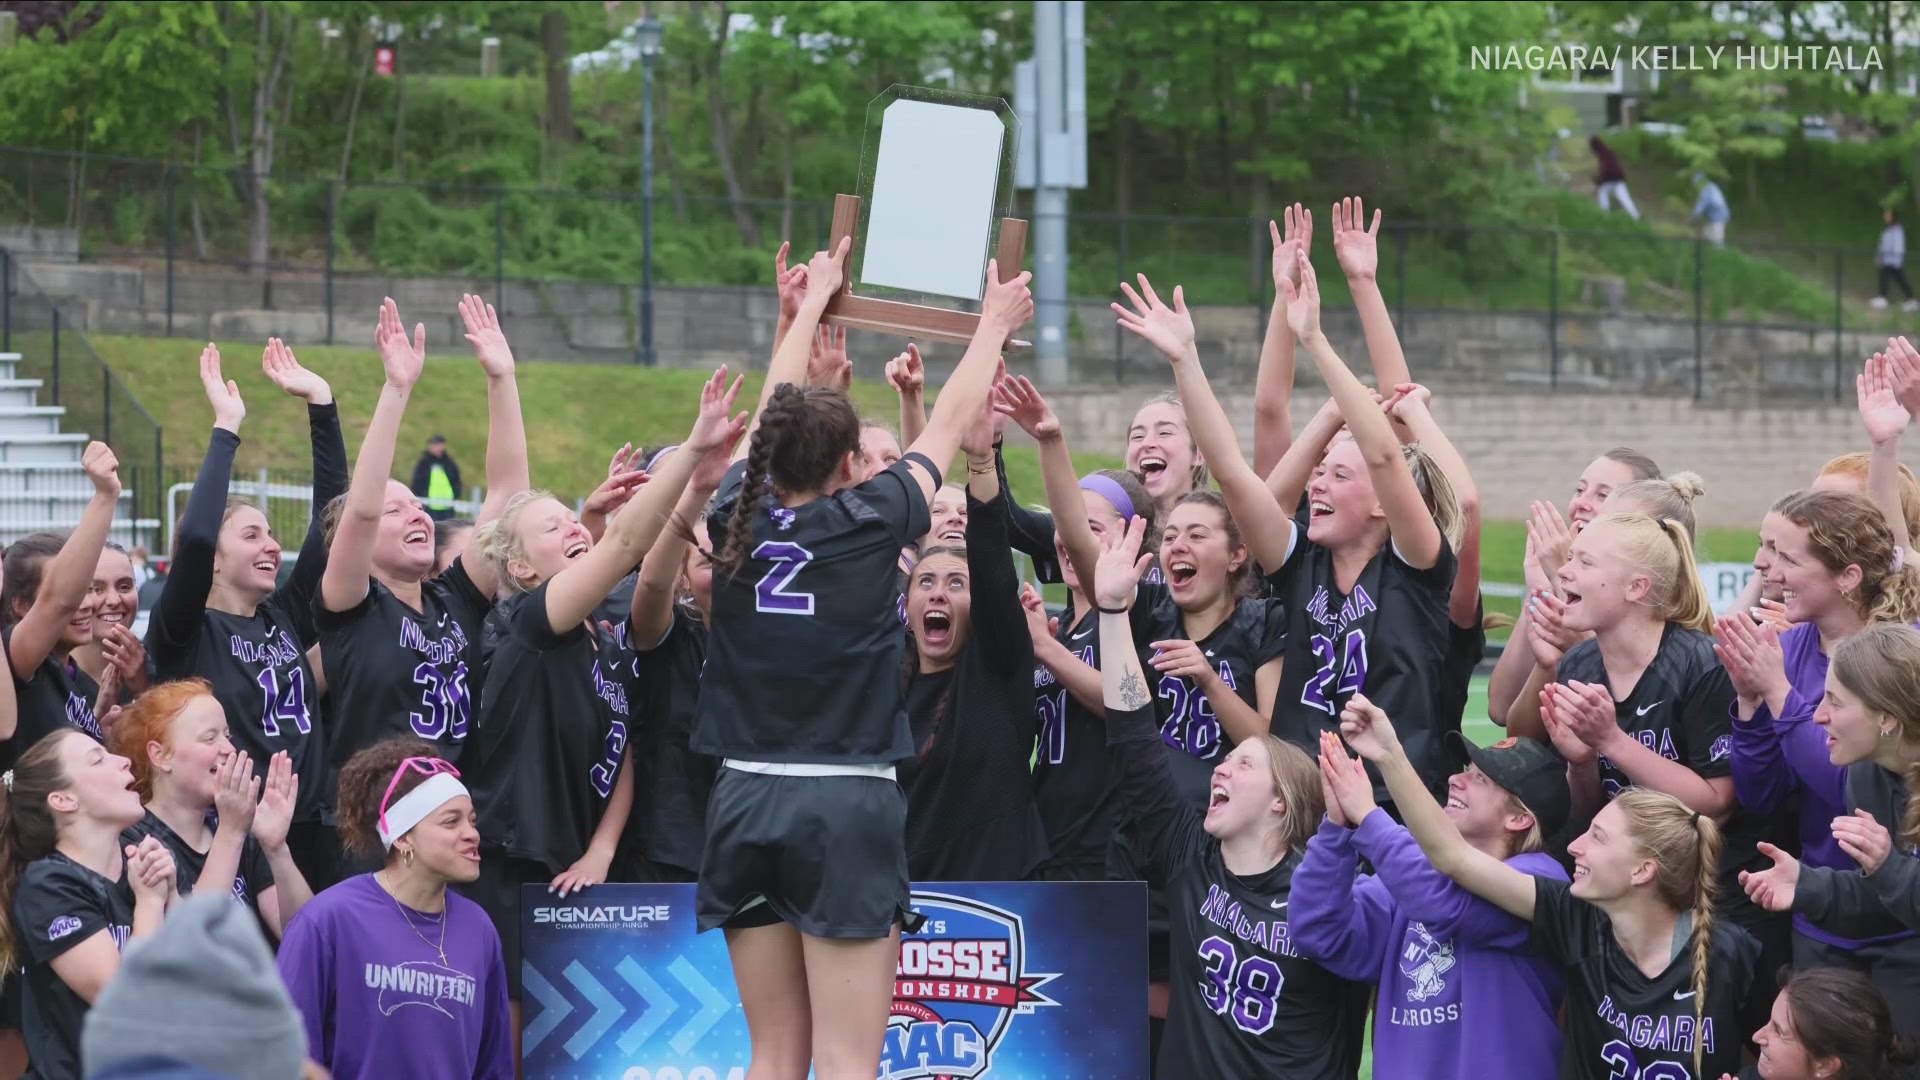 With its most recent win, Niagara not only secured its first conference crown, but also punched its first ever ticket to the NCAA Tournament.